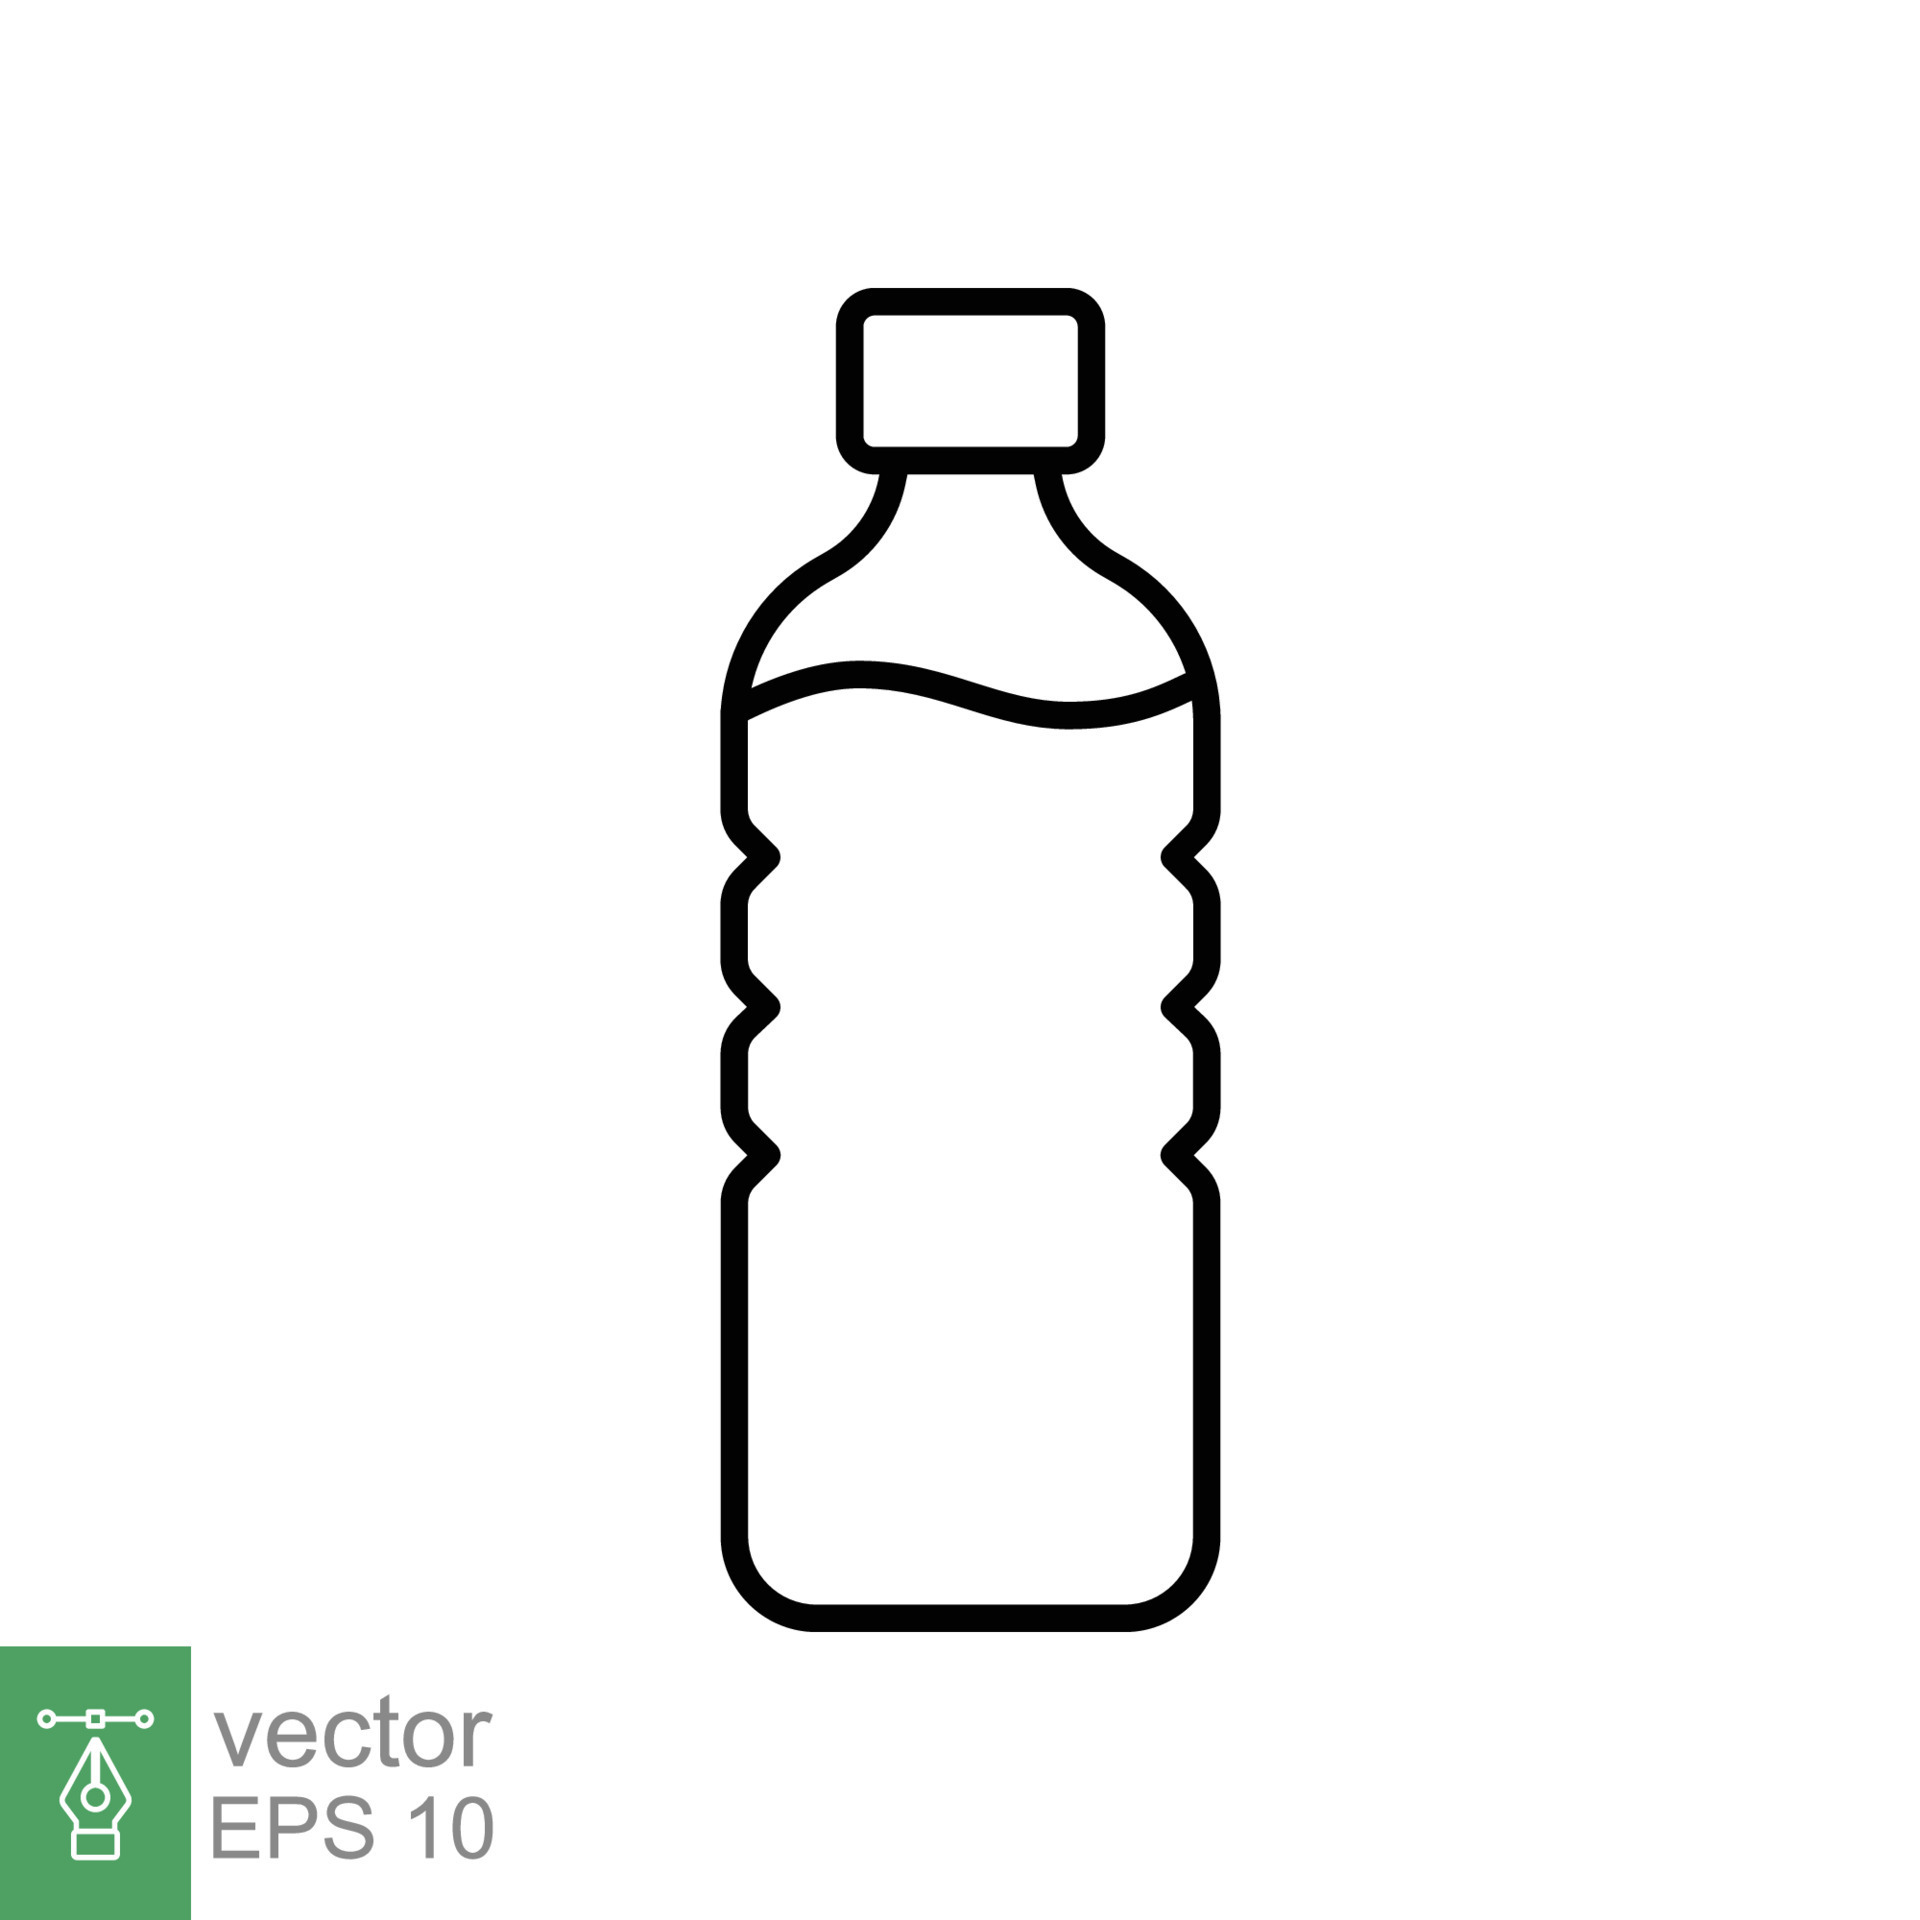 https://static.vecteezy.com/system/resources/previews/019/600/311/original/water-bottle-line-icon-simple-outline-style-plastic-bottle-drink-mineral-soda-juice-food-and-beverage-package-concept-illustration-isolated-on-white-background-eps-10-vector.jpg